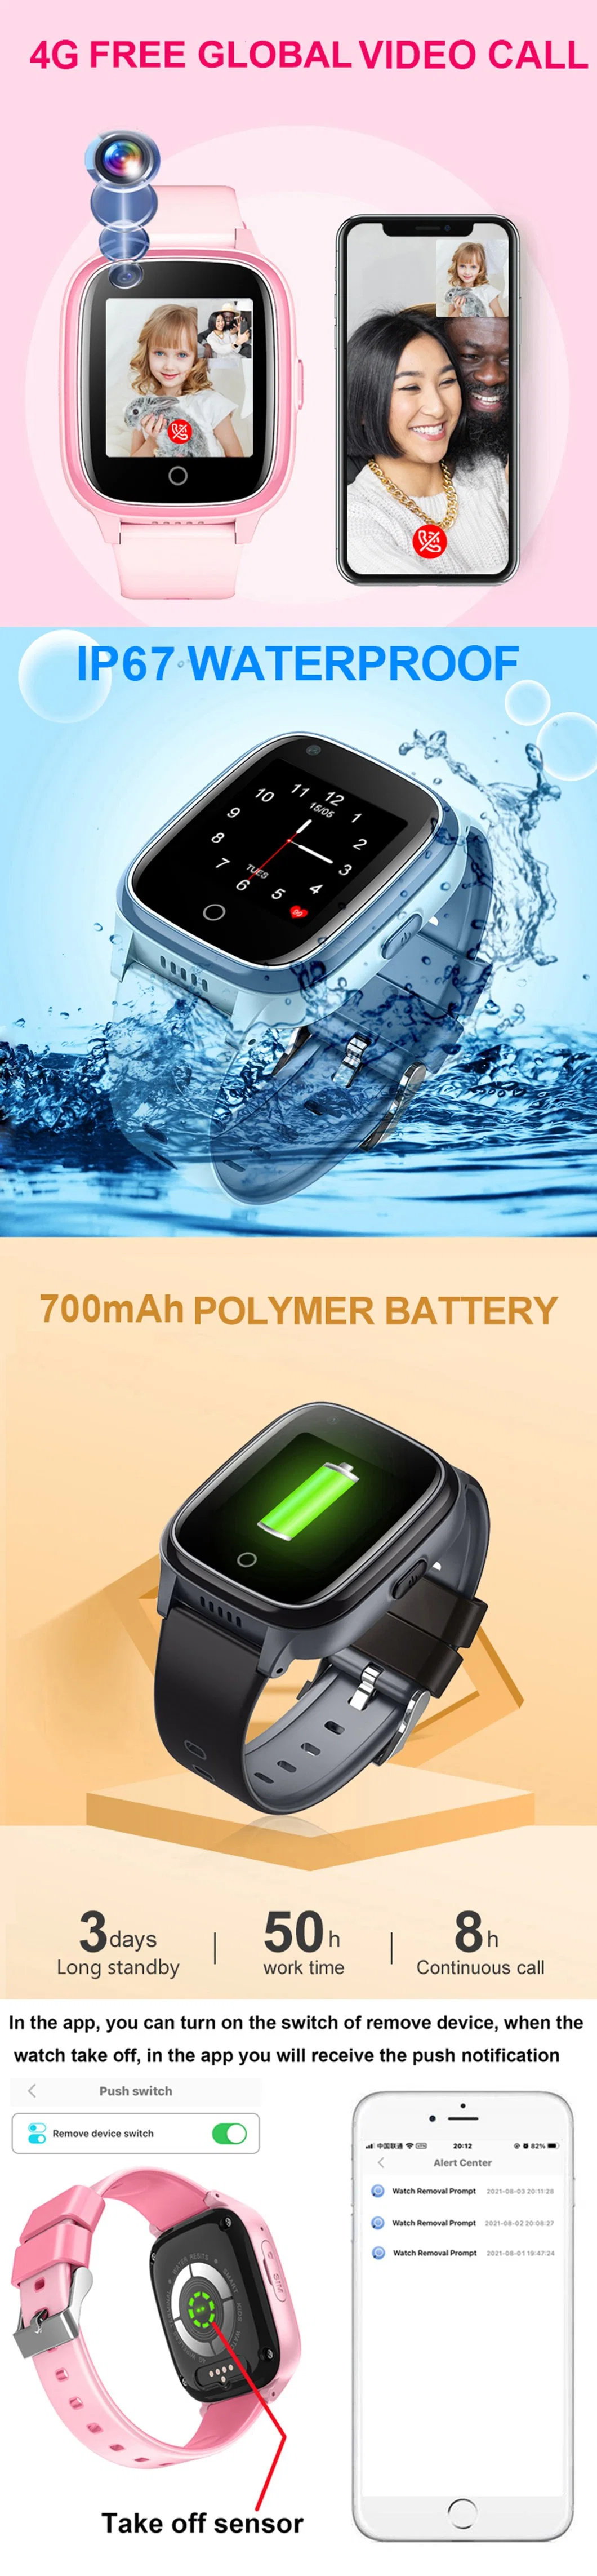 China factory 4G IP67 Waterproof Removal Alarm Smart Kids Cell Phone GPS Tracker Watch with Video Call for Child Security D31U